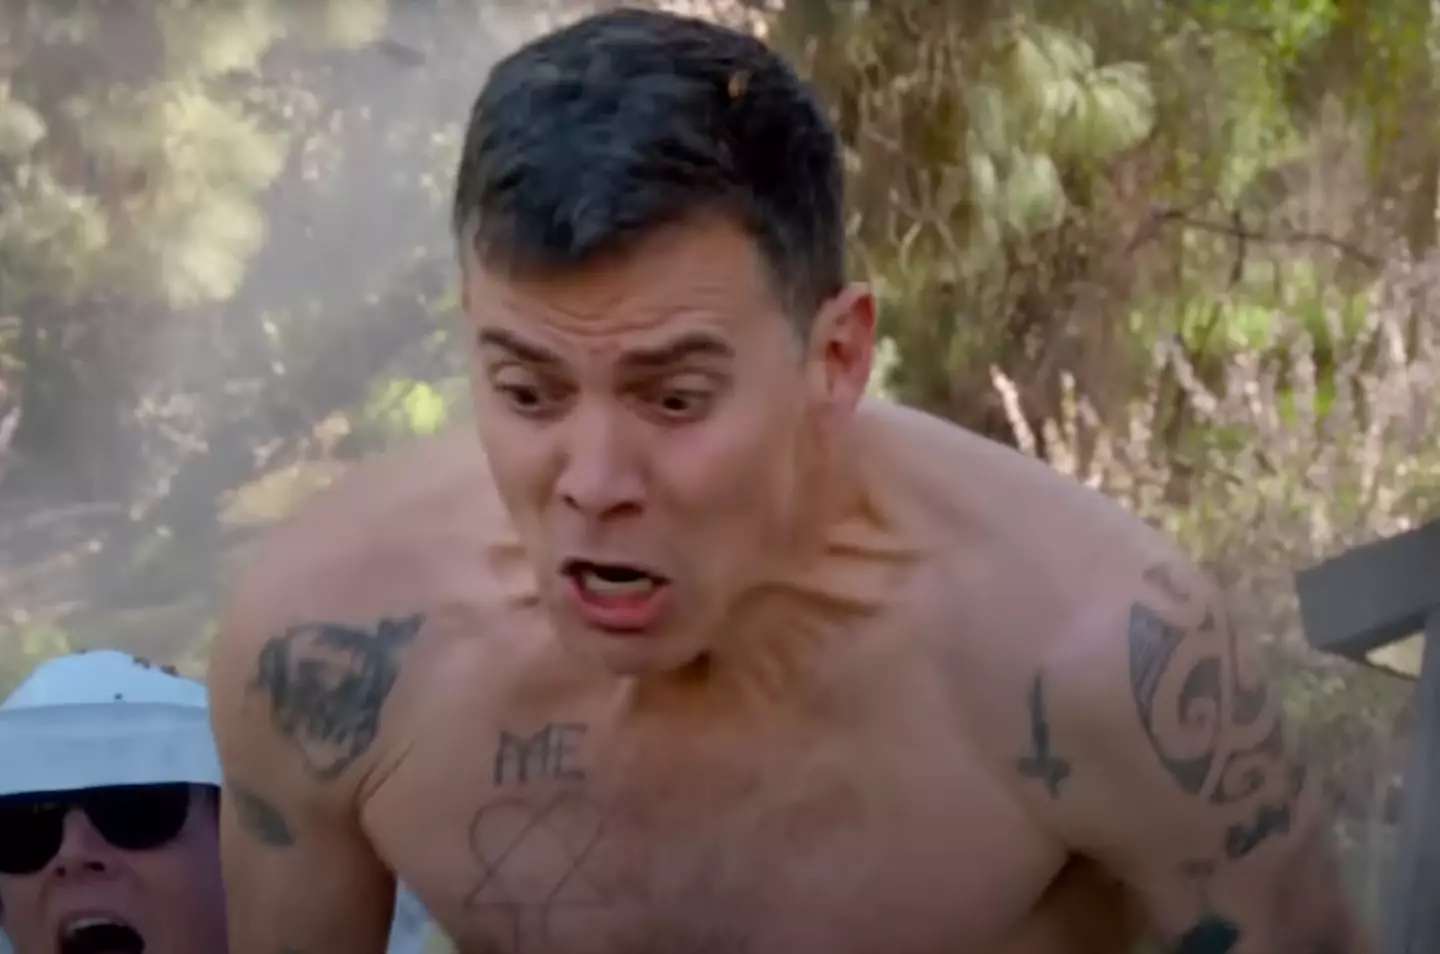 Steve-O has revealed why he thinks Jackass Forever was 'kind of a bummer'.